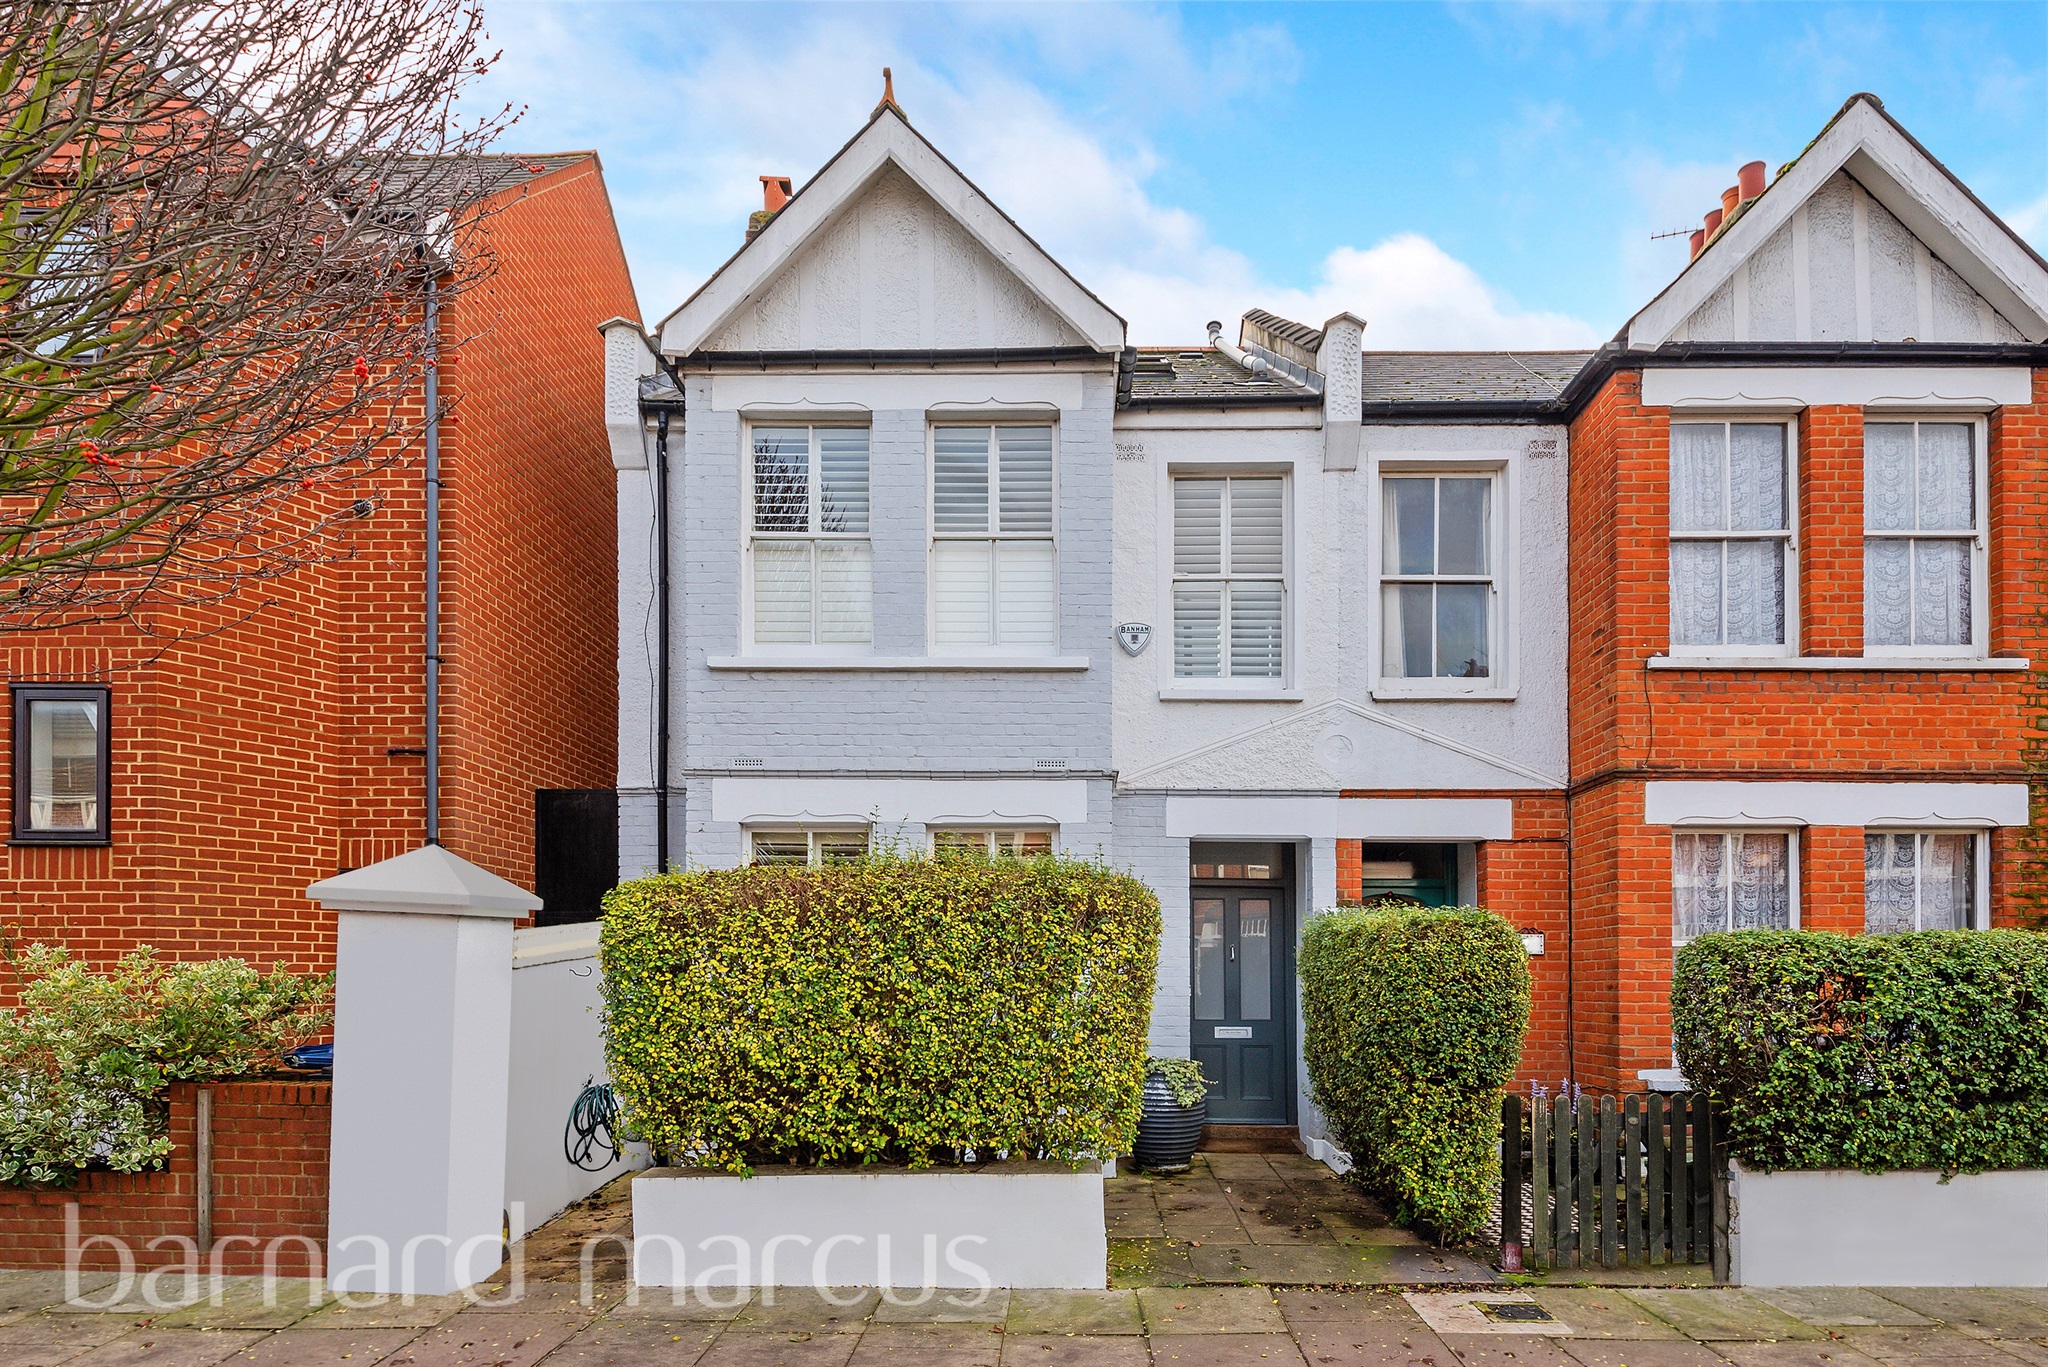 4 bedroom end terrace house for sale 0